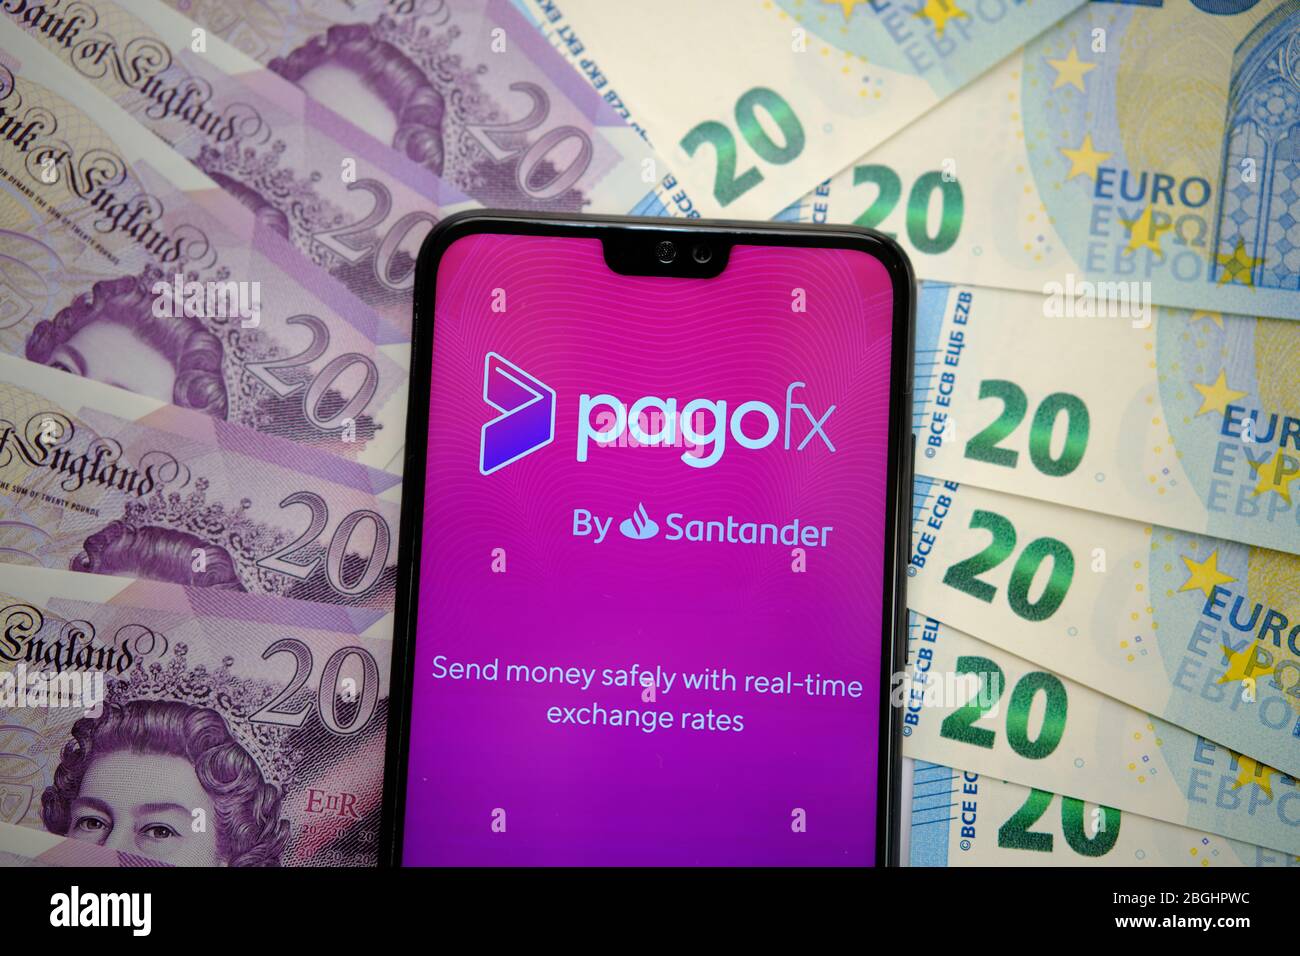 PagoFx money transfer app on the smartphone screen with pounds and EURO banknotes around it. Stock Photo